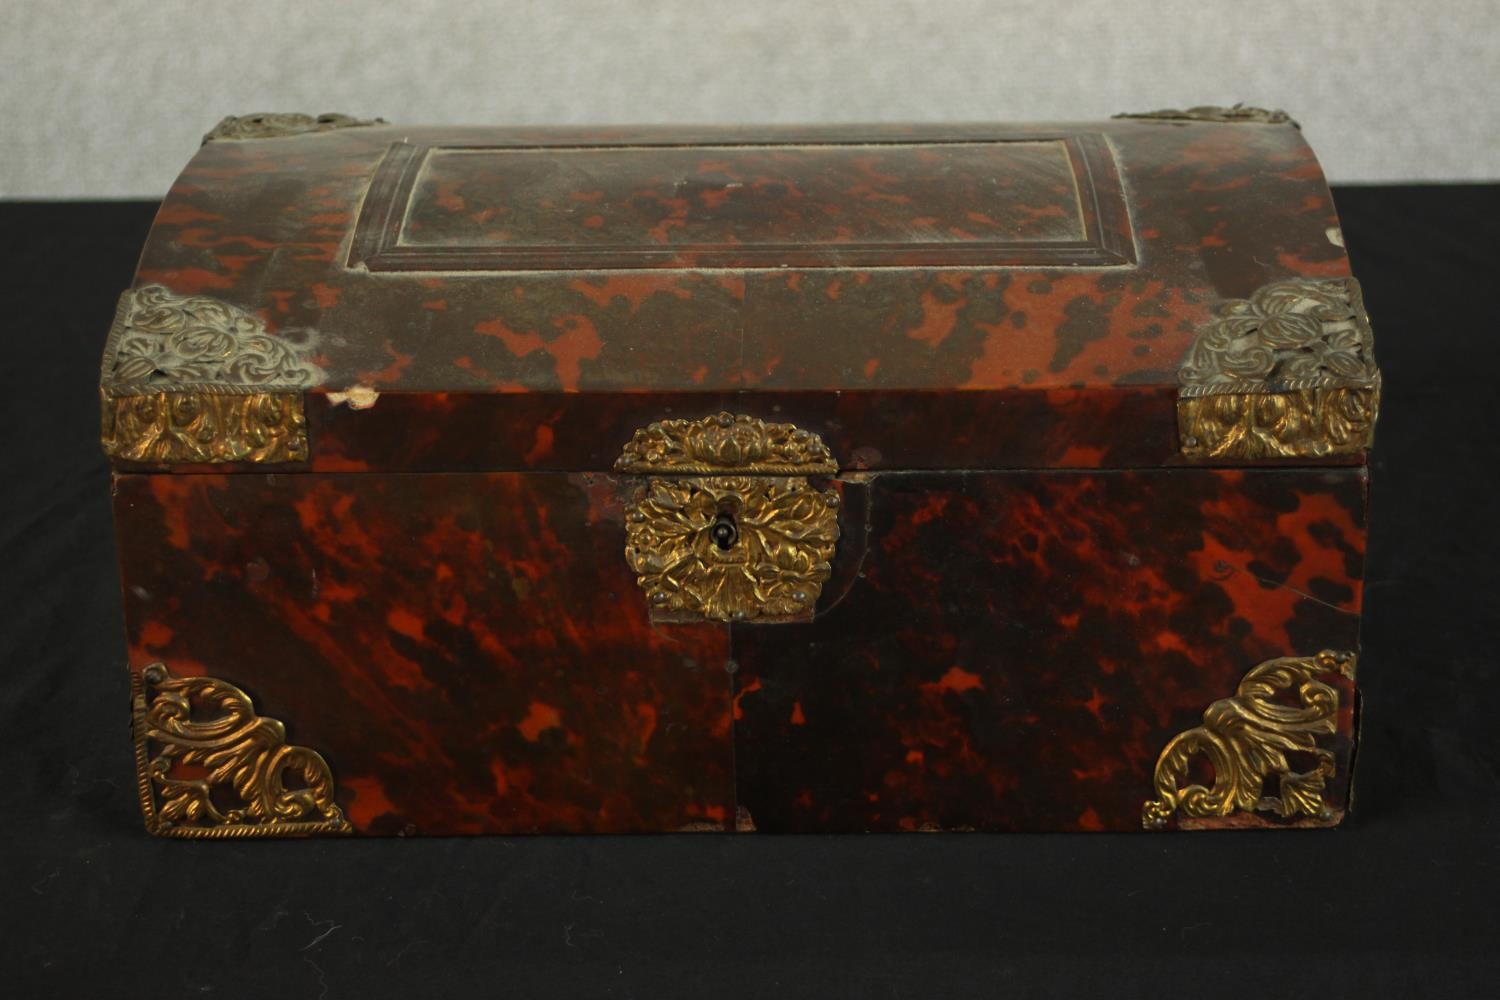 A 19th century tortoiseshell mounted dome topped box with brass mounts, opening to reveal velvet